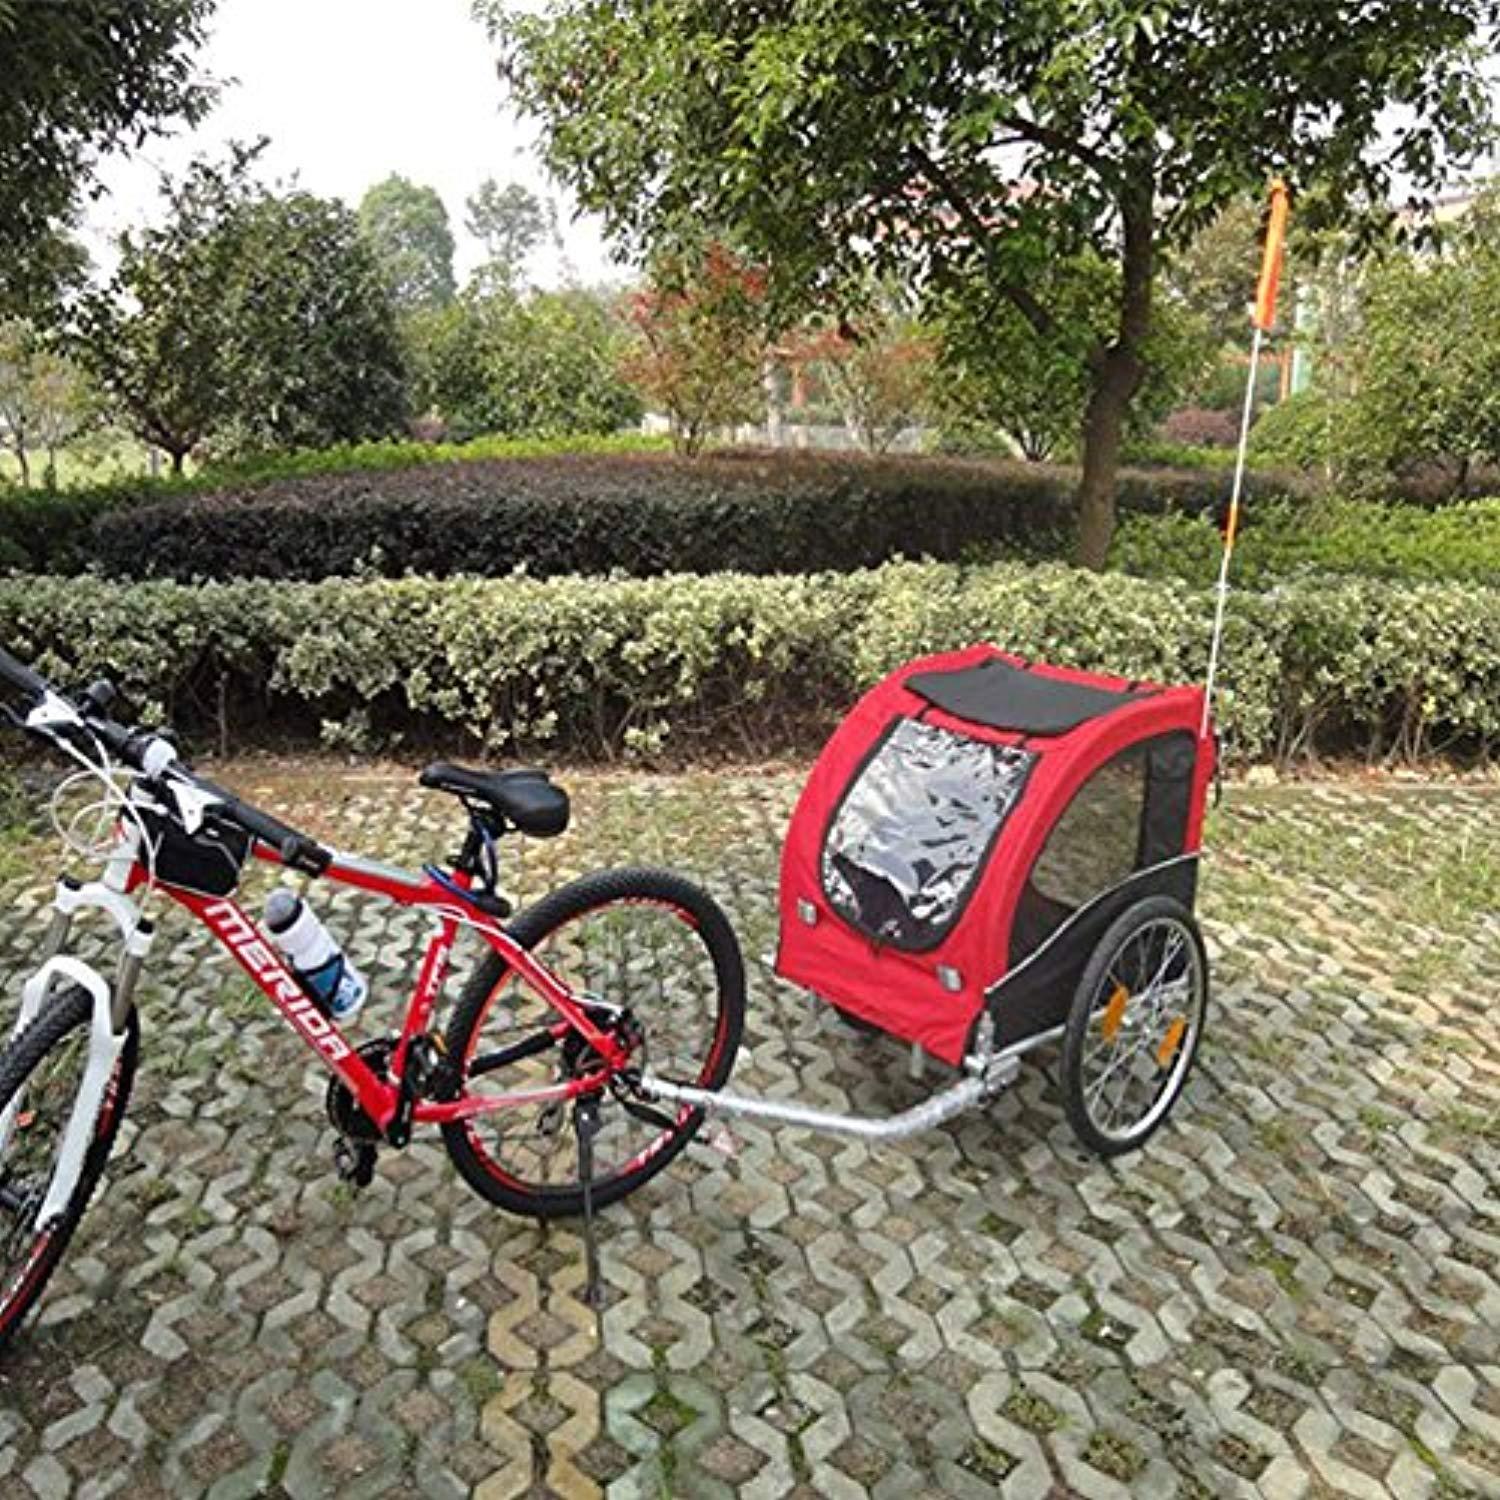 Bosonshop Pet Bike Trailer Bicycle Dog Carrier with Hitch, Suspension, Safety Flag, and Reflectors for Travel, Red